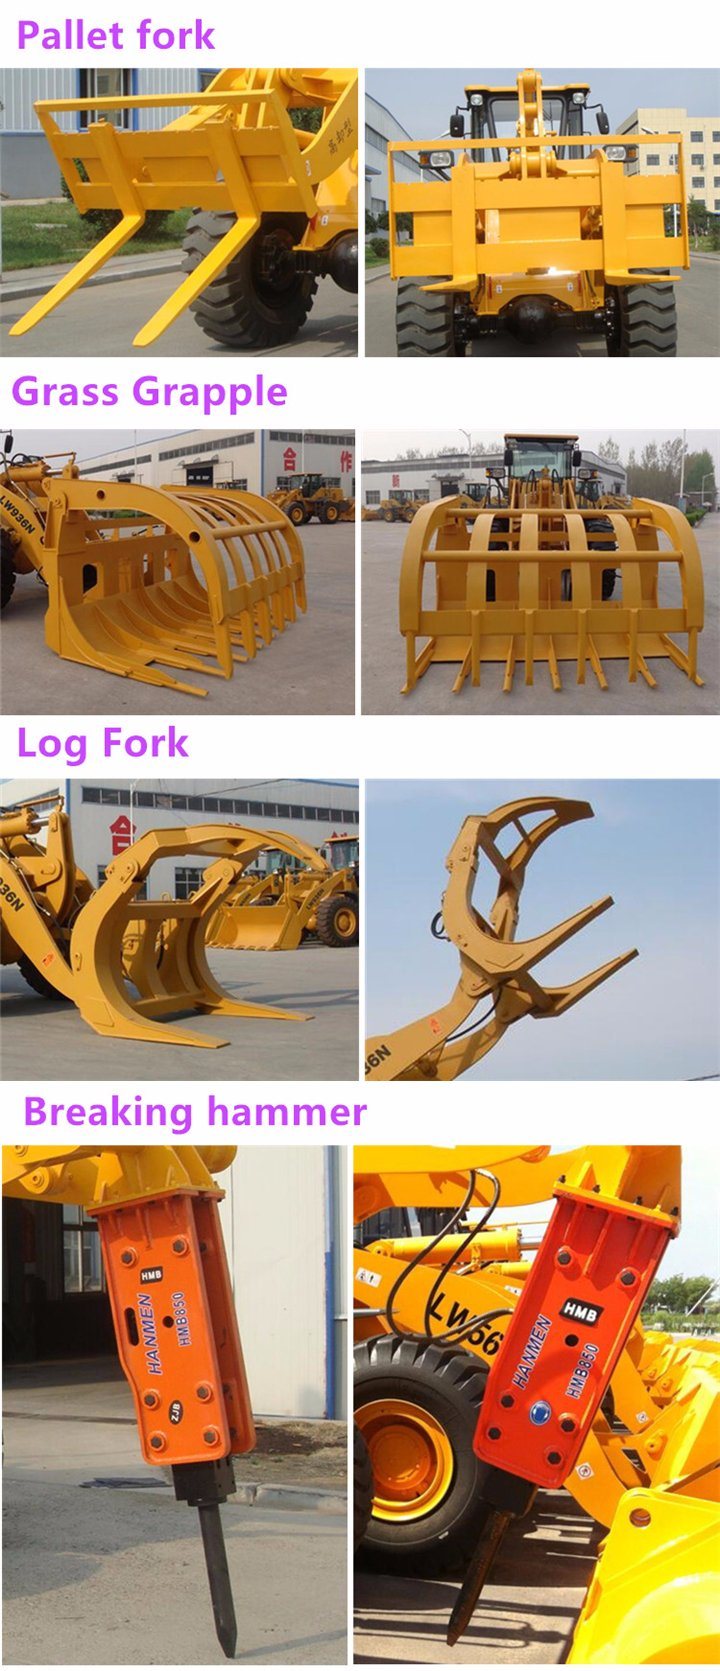 China Cheap Automatic Cargador Frontal Wheel Loader Price List